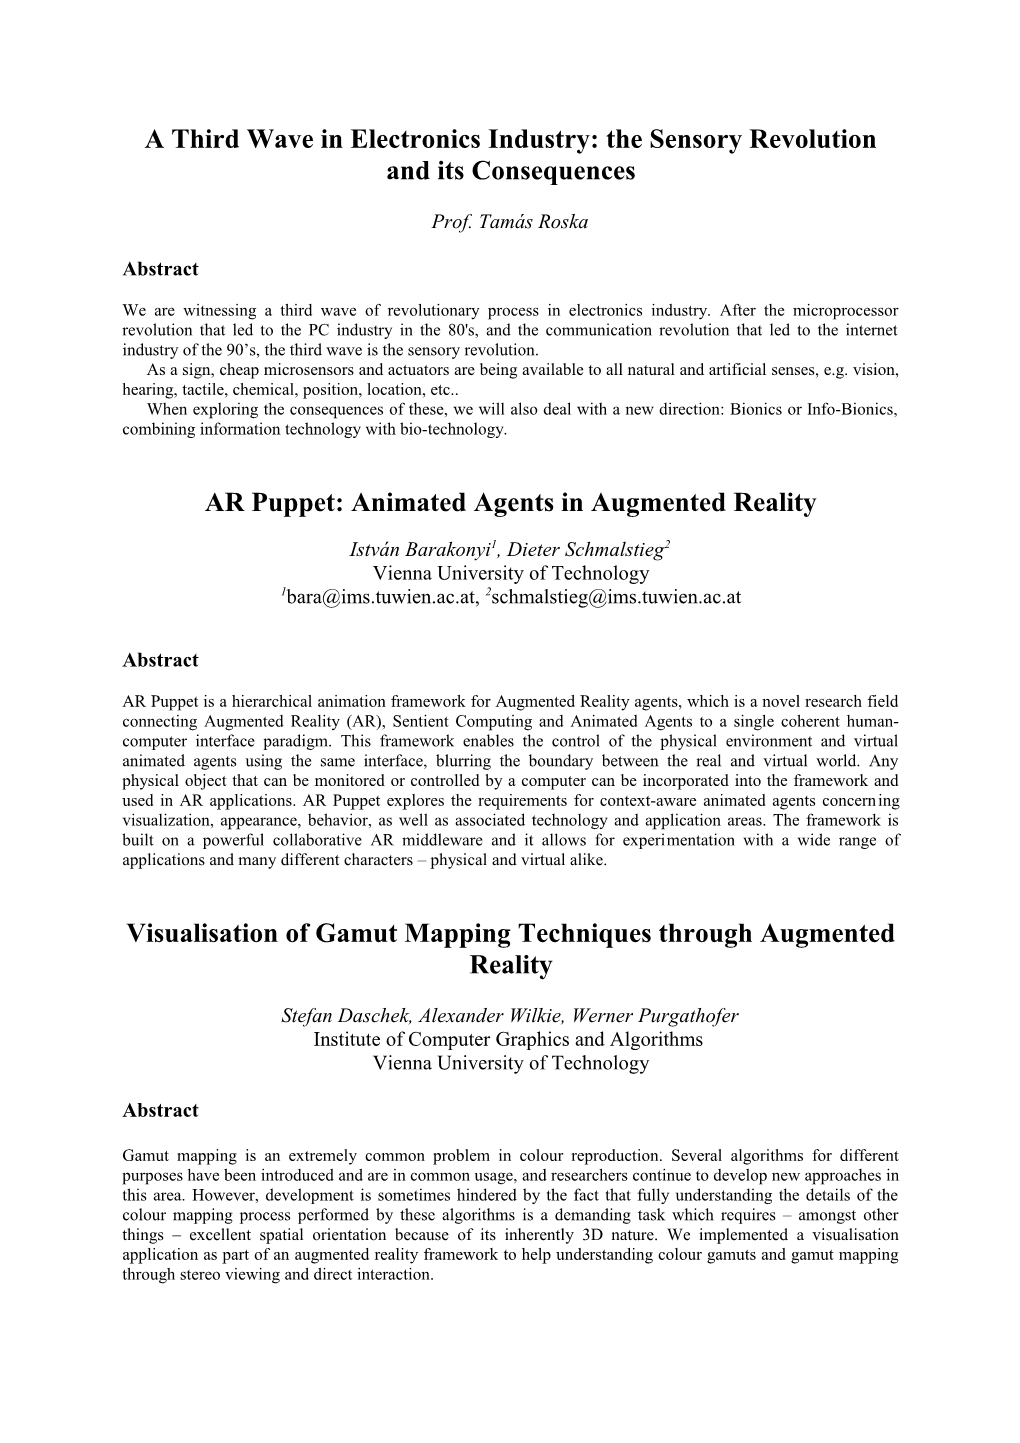 Virtual Reality and Its Applications in the Treatment of Post-Traumatic Stress Disorder